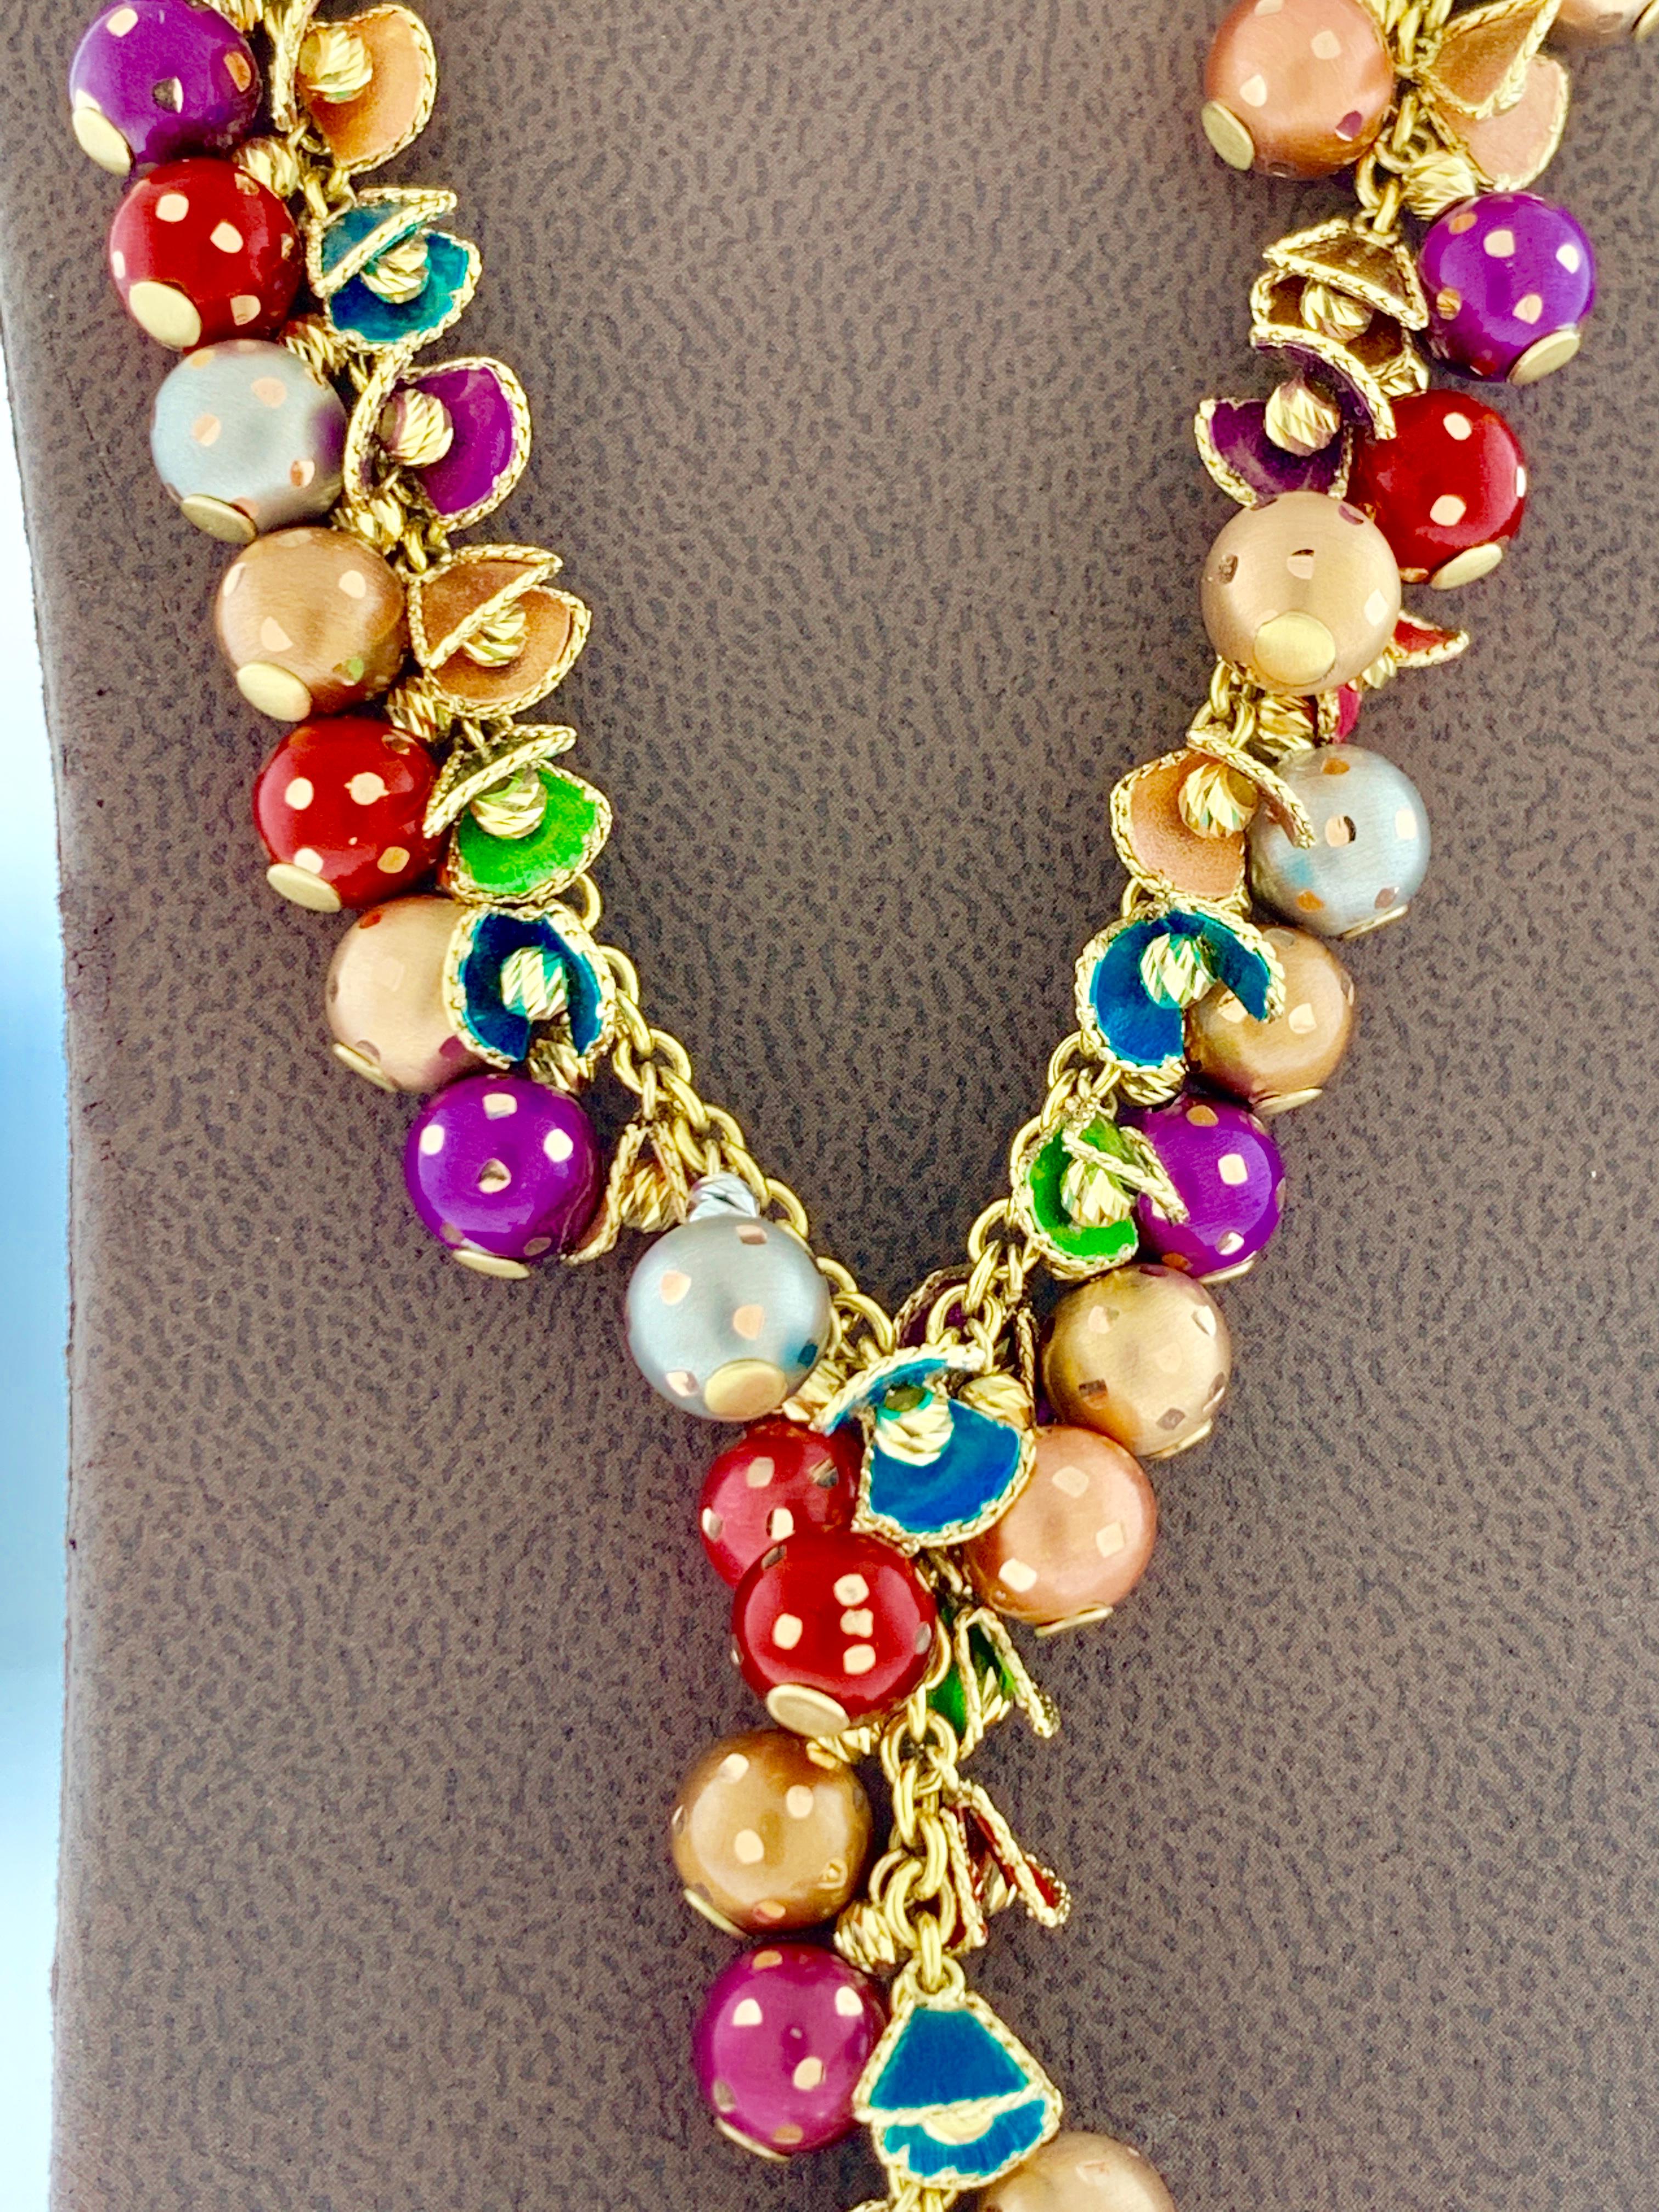 52 Gm 18 Karat multi color enamel  Necklace & Earring Suite Bridal Princess Necklace
One of our premium Neckalce  from our Bridal collection.
Necklace and matching earrings
Length 22-23 inches
length of the earring about 2 inches
Weight of the set